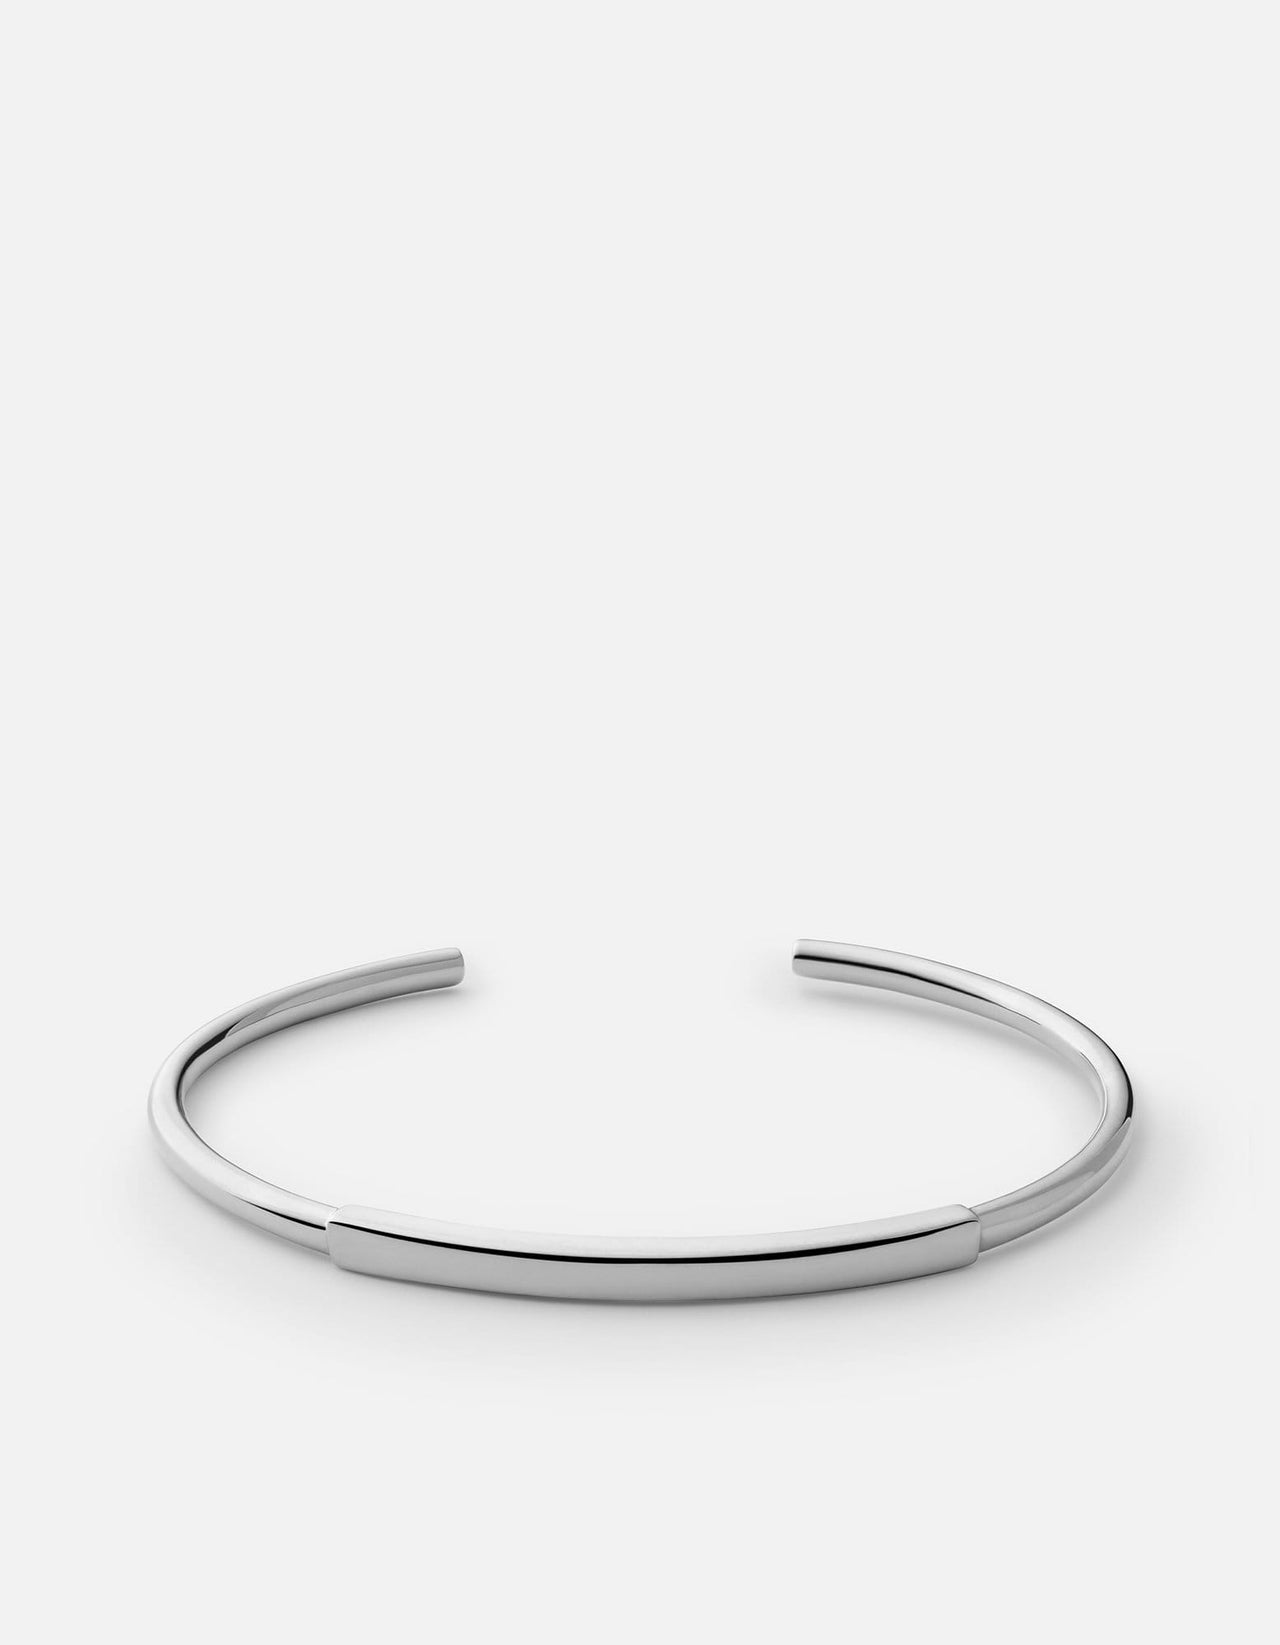 Personalized Engraved Stainless Steel Cuff In Malay Bracelet With Silver  And Gold Charm Bangle Fashionable And Elegant From Weikuijewelry, $0.7 |  DHgate.Com